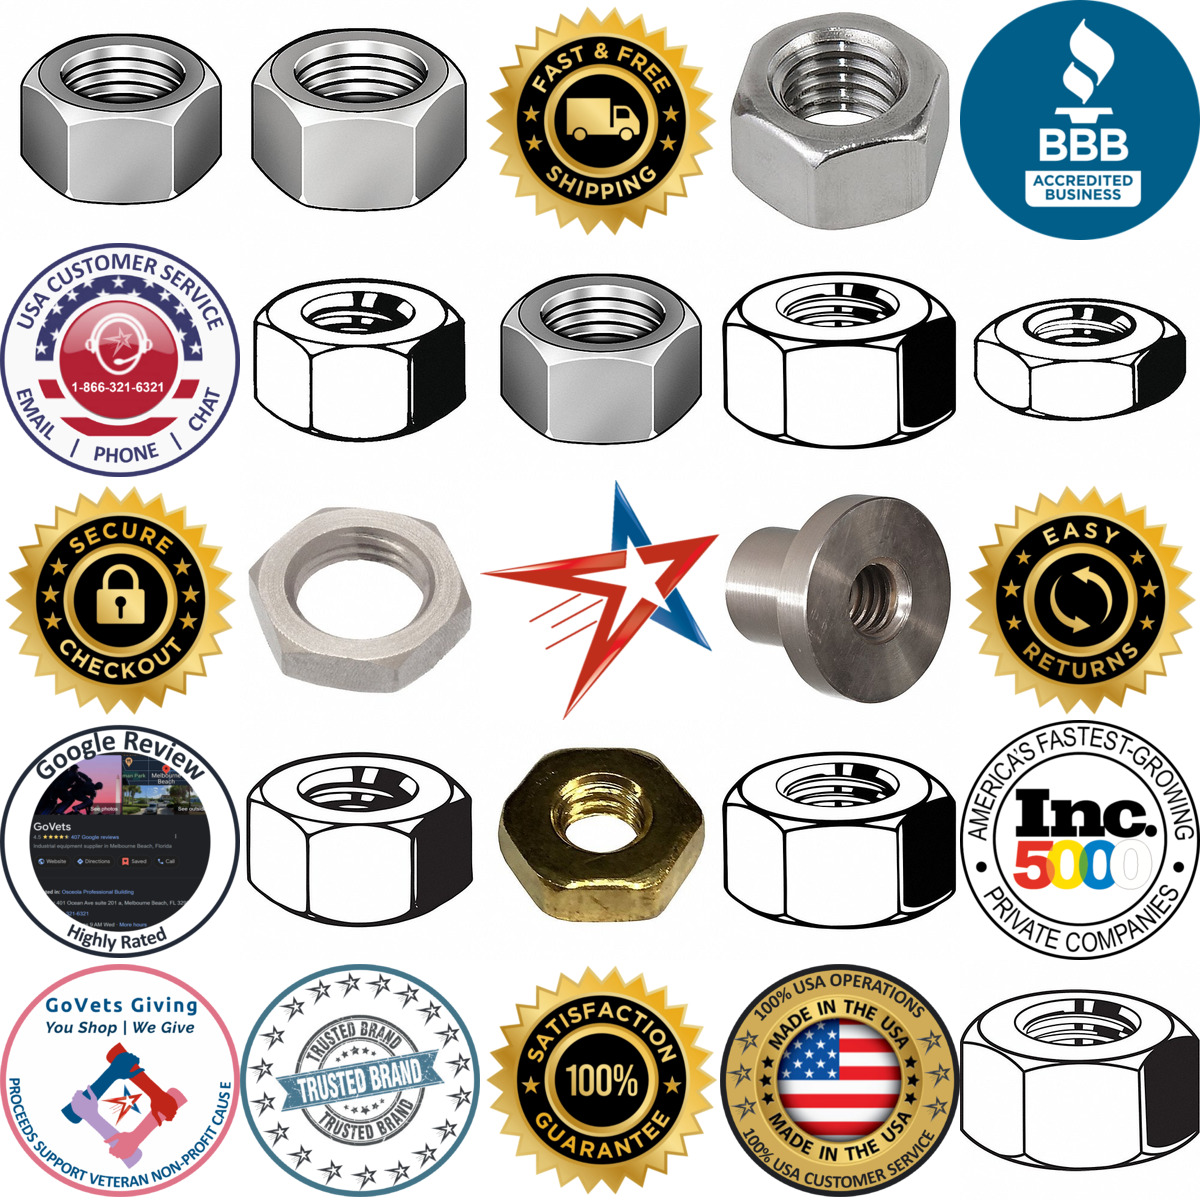 A selection of Standard Hex Nuts products on GoVets